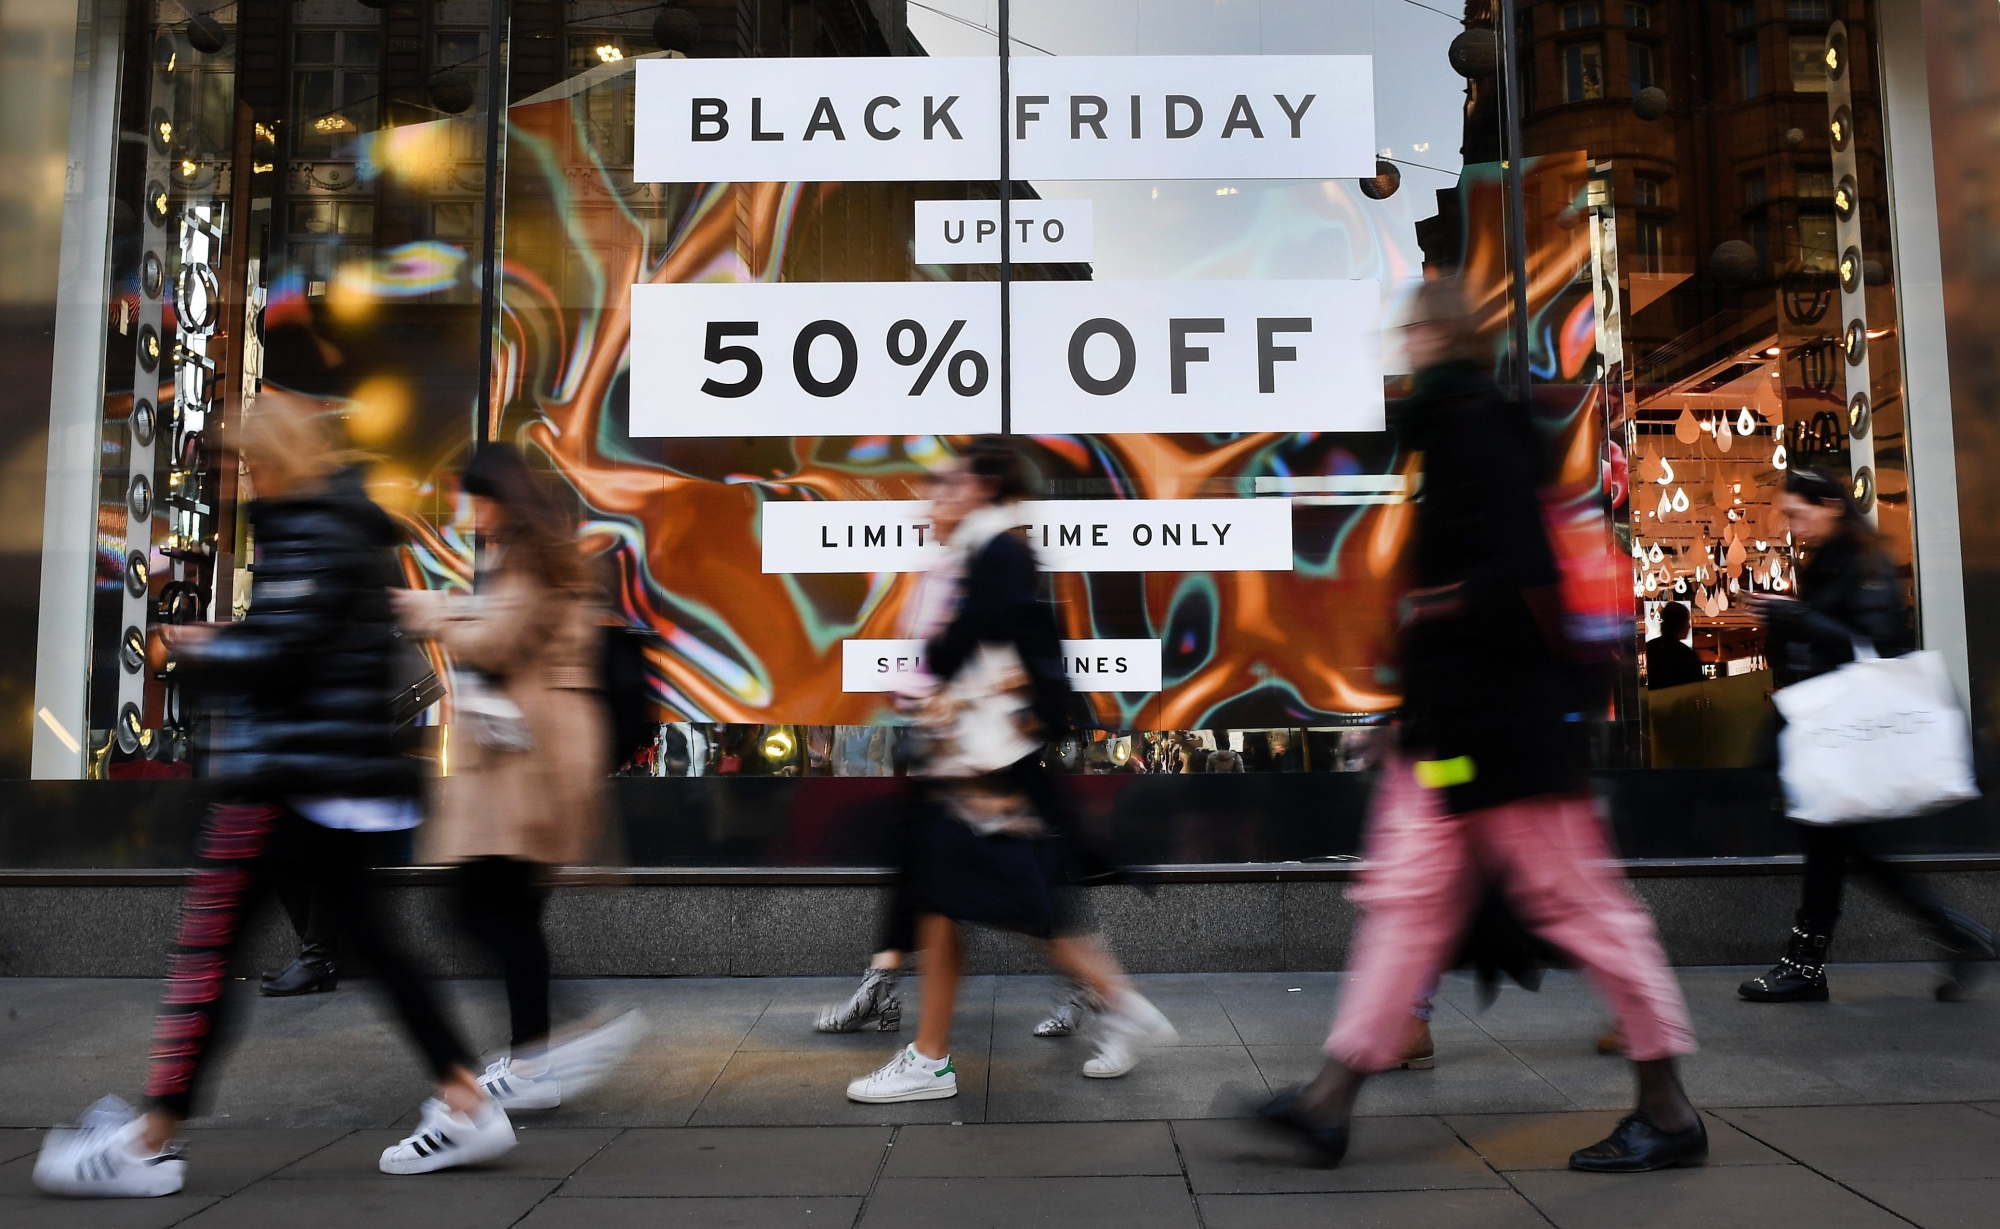 epa06345692 Shoppers walk past a store offering Black Friday sales in London,  Britain, 23 November 2017. According to economic forecasts the UK is set to undergo five years of negative growth. UK earnings in 2022 could still be less than in when the financial crisis hit in 2008.  EPA/ANDY RAIN BRITAIN BUDGET ECONOMY FORECAST